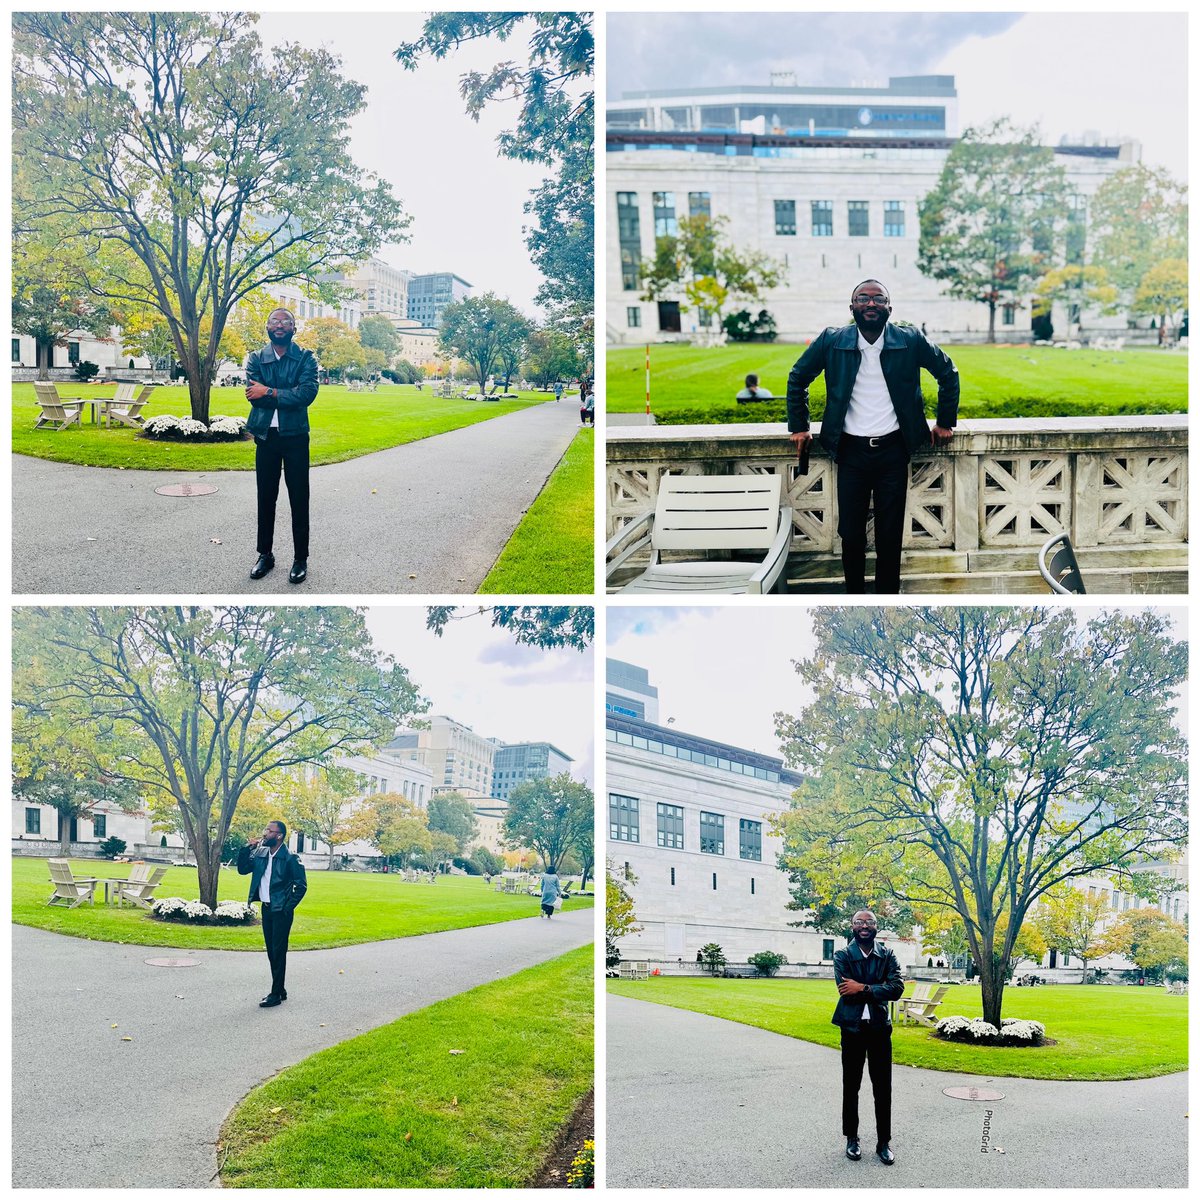 Took time off to visit #HarvardUniversity: A nurturing environment on A State-Of-The Art Campus in #Boston city, #Massachusetts. 🇺🇸 #HMS #HarvardMedicalSchool #SaloneTwitter